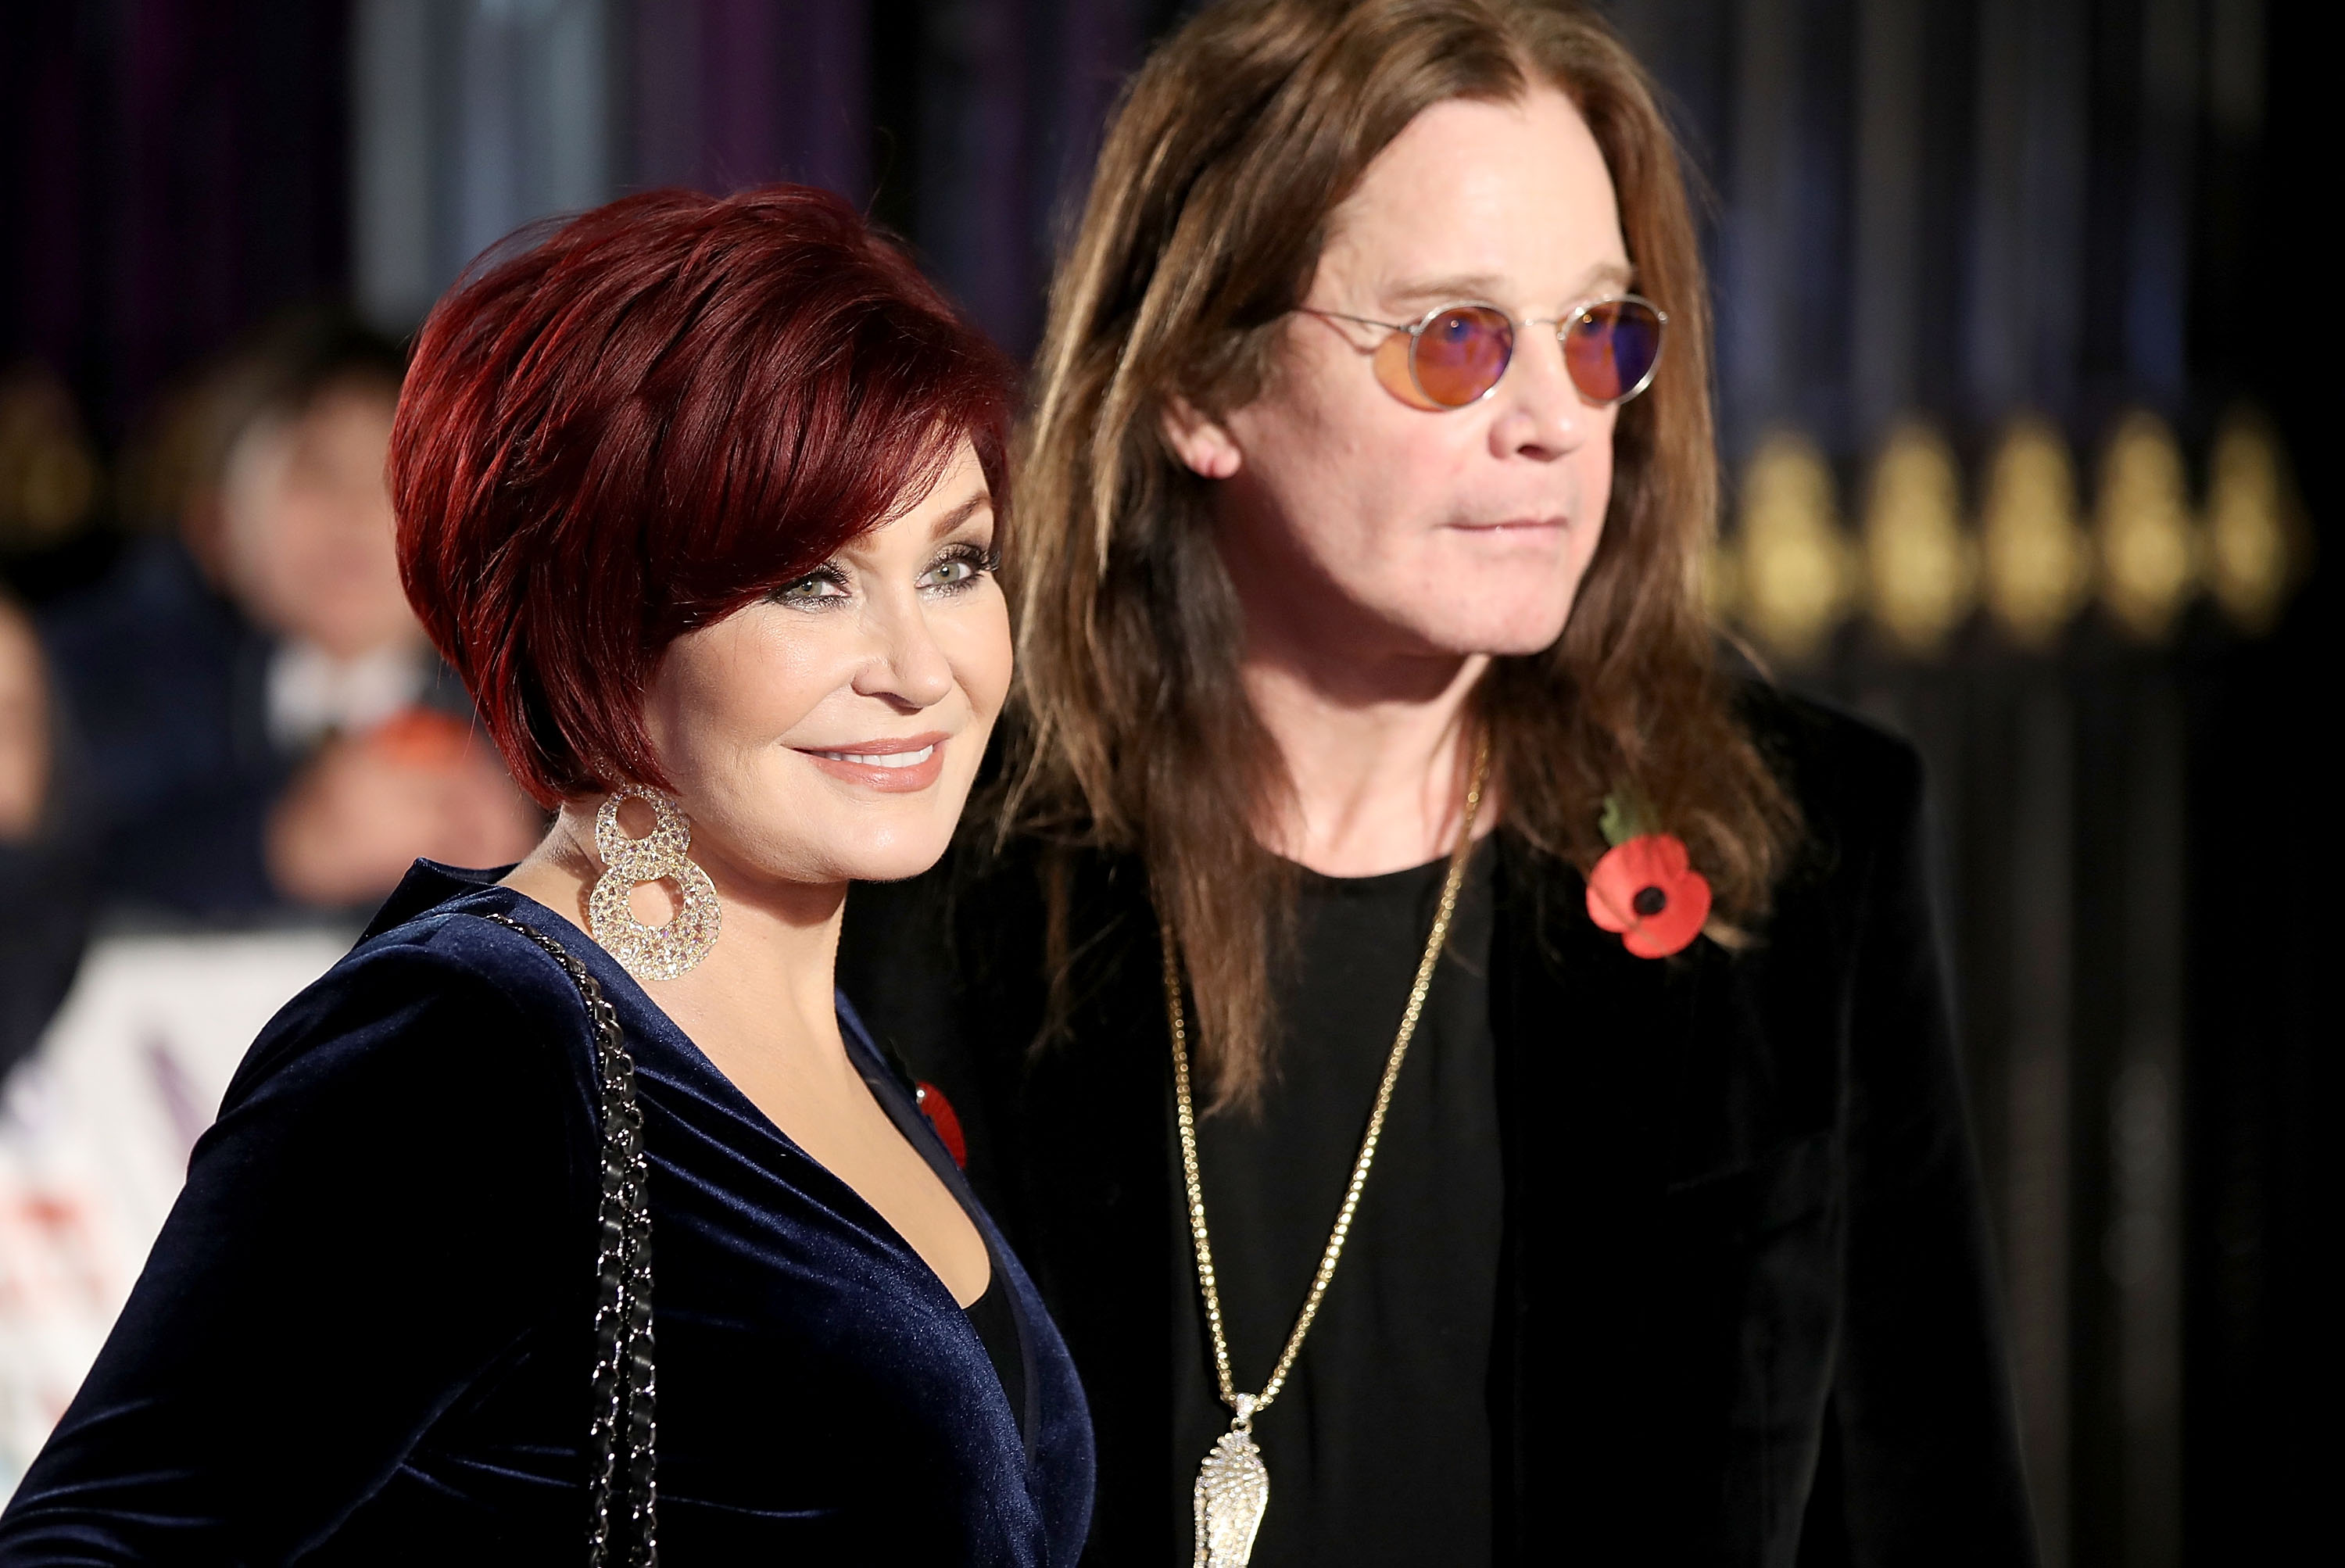 Ozzy and Sharon Osbourne at the Pride of Britain Awards at Grosvenor House on October 30, 2017 in London, England | Source: Getty Images